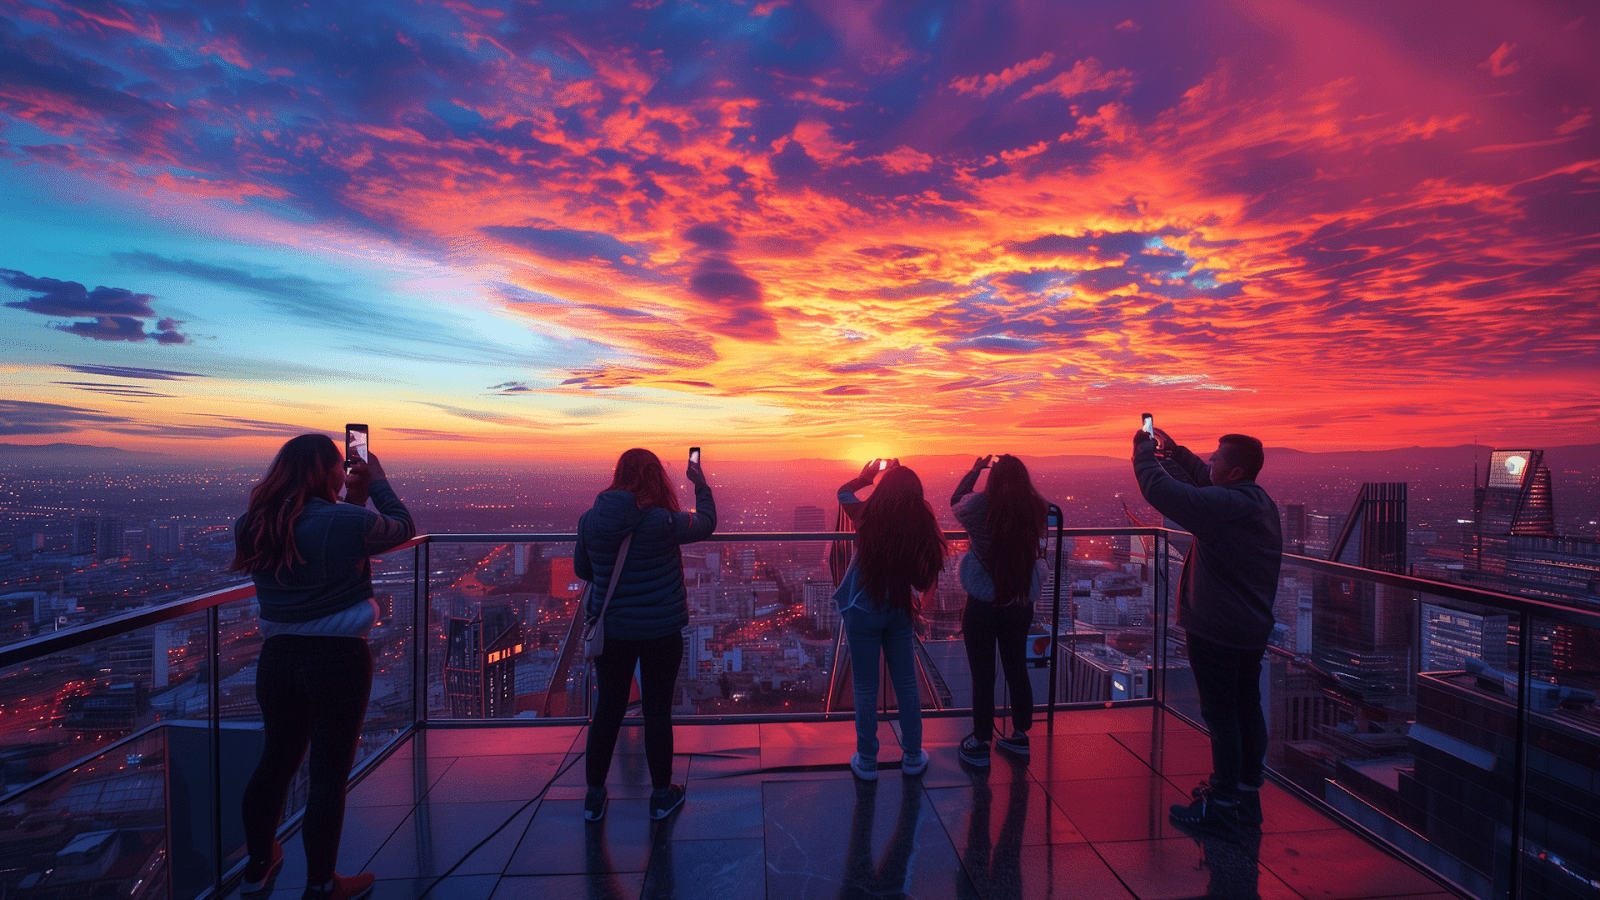 Group capturing the vibrant sunrise from a city rooftop in Mexico City